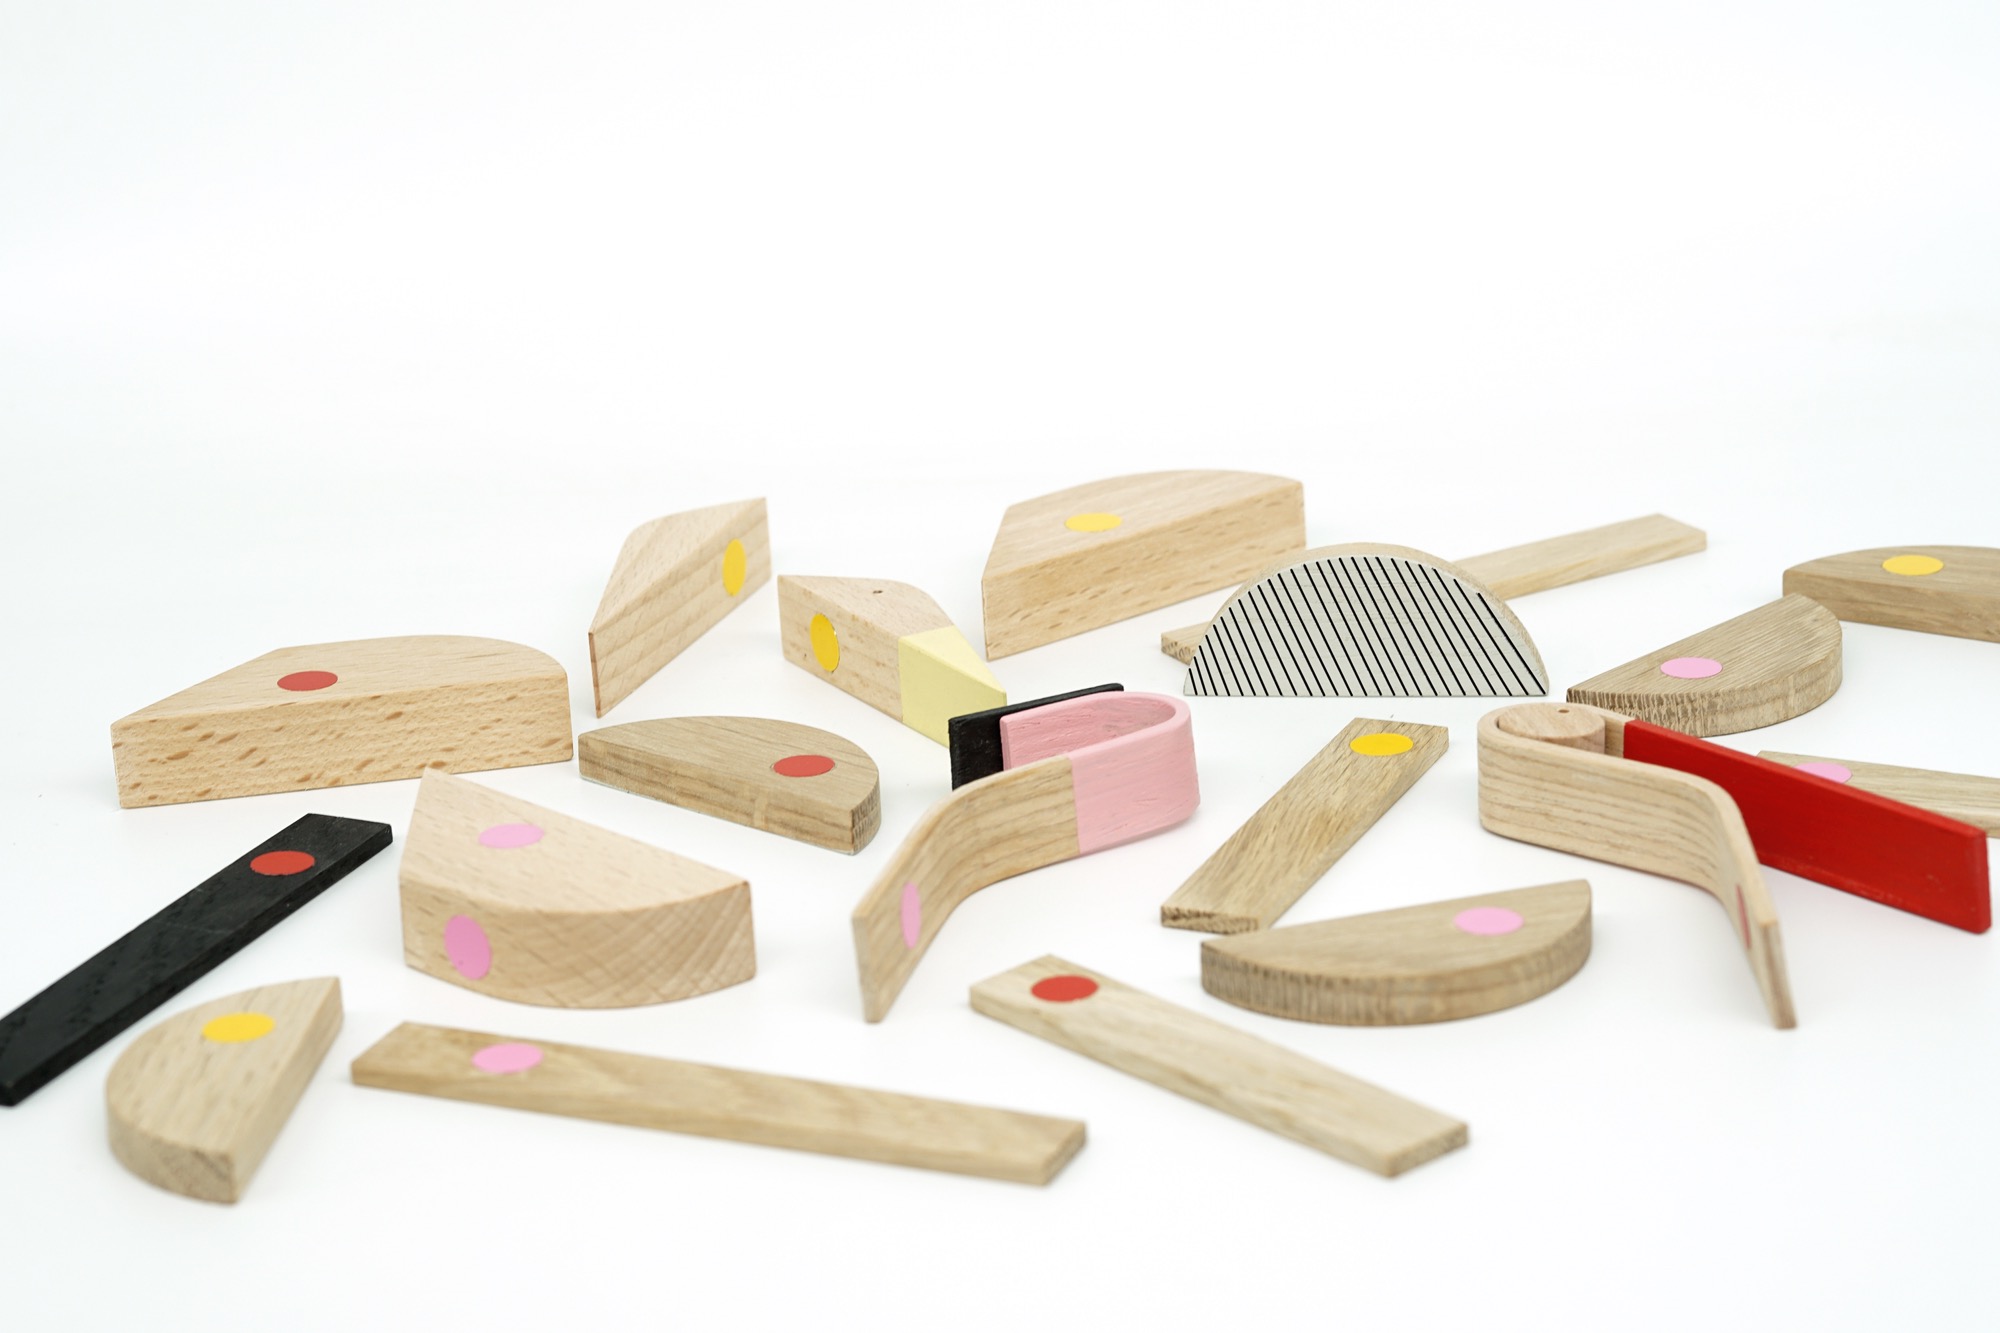 an array of geometric pieces of wood with red magnets that can be assembled into a bird or other creatures